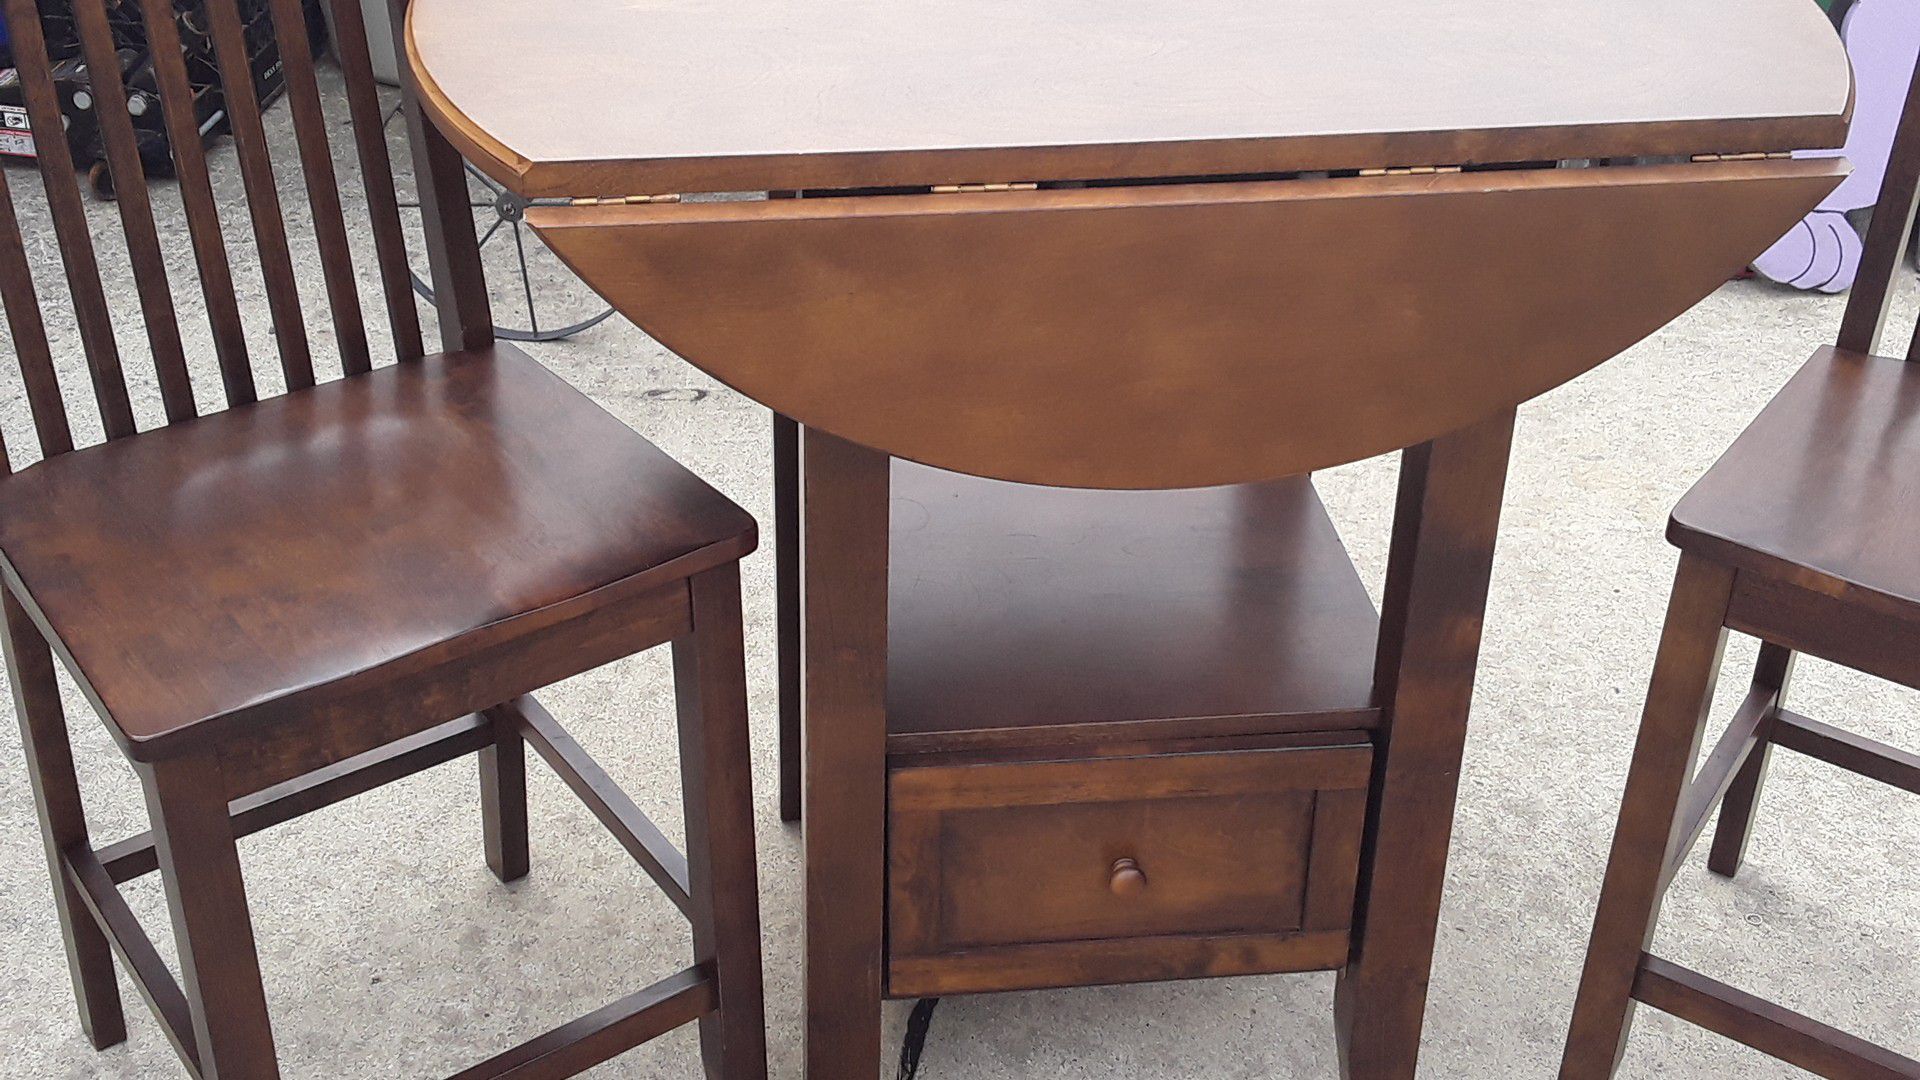 Solid wood table, 2 chairs Nook table